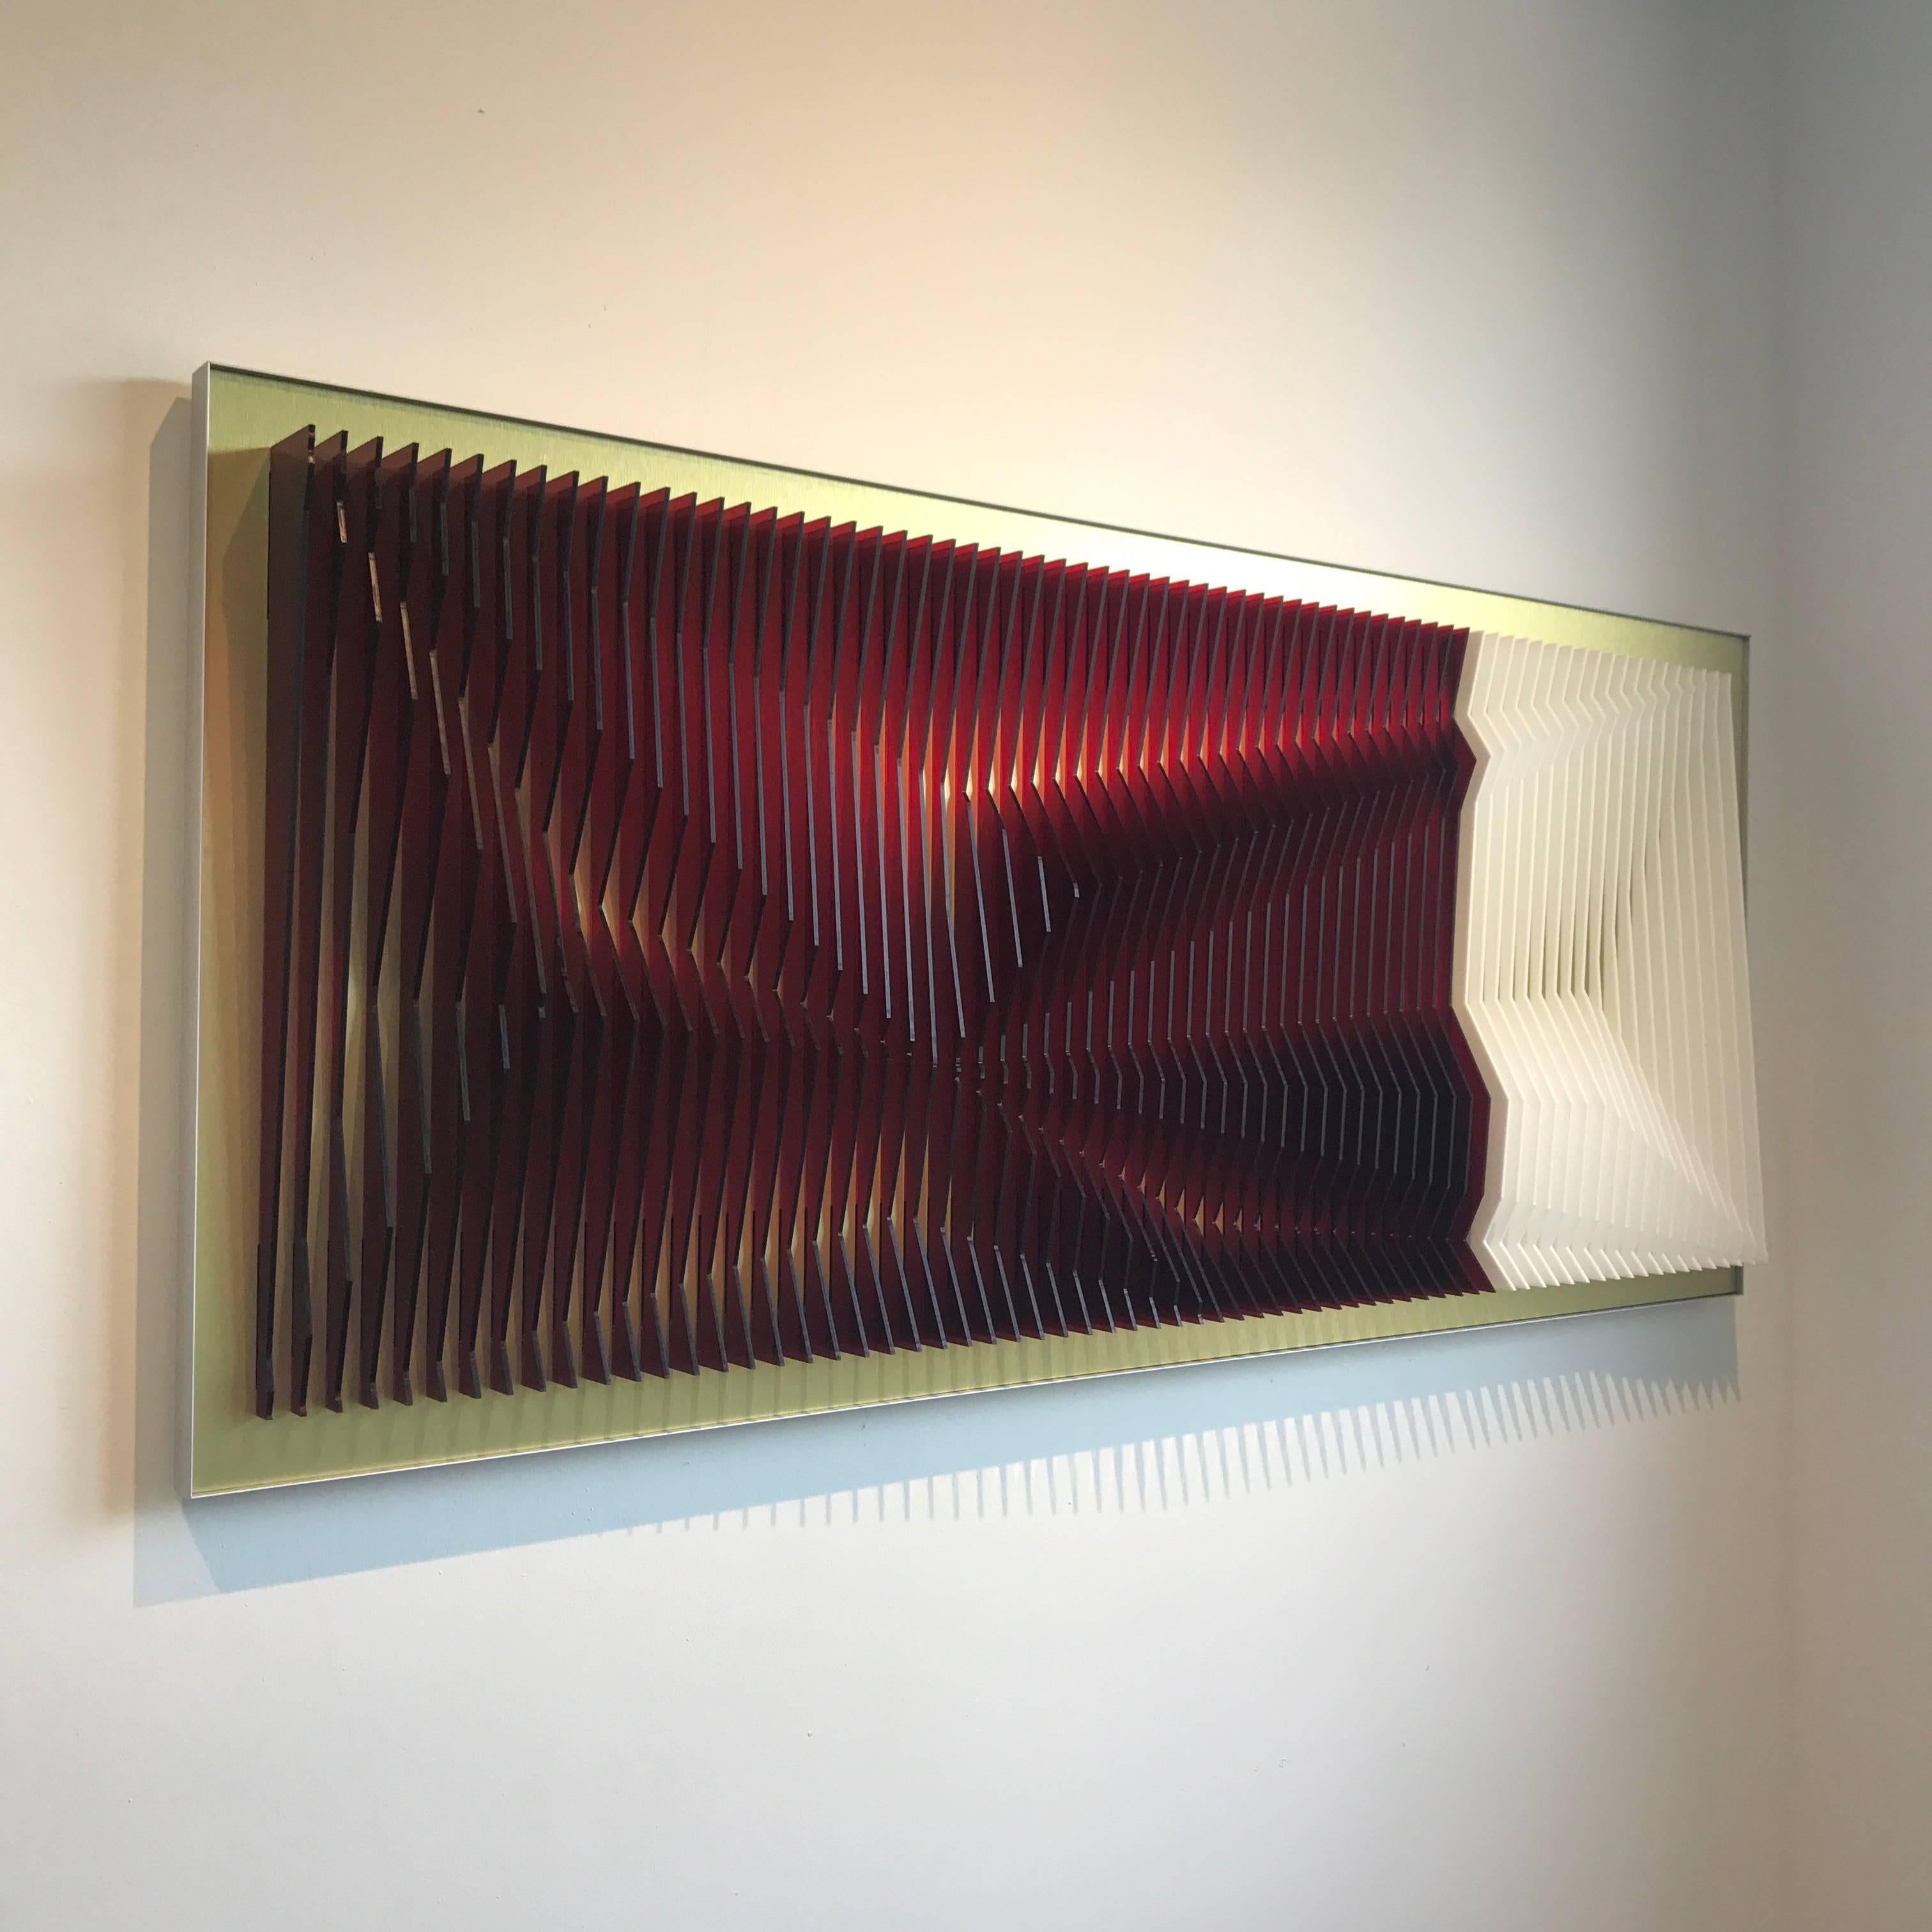 Wine deep - kinetic wall sculpture by J. Margulis - Sculpture by Jose Margulis